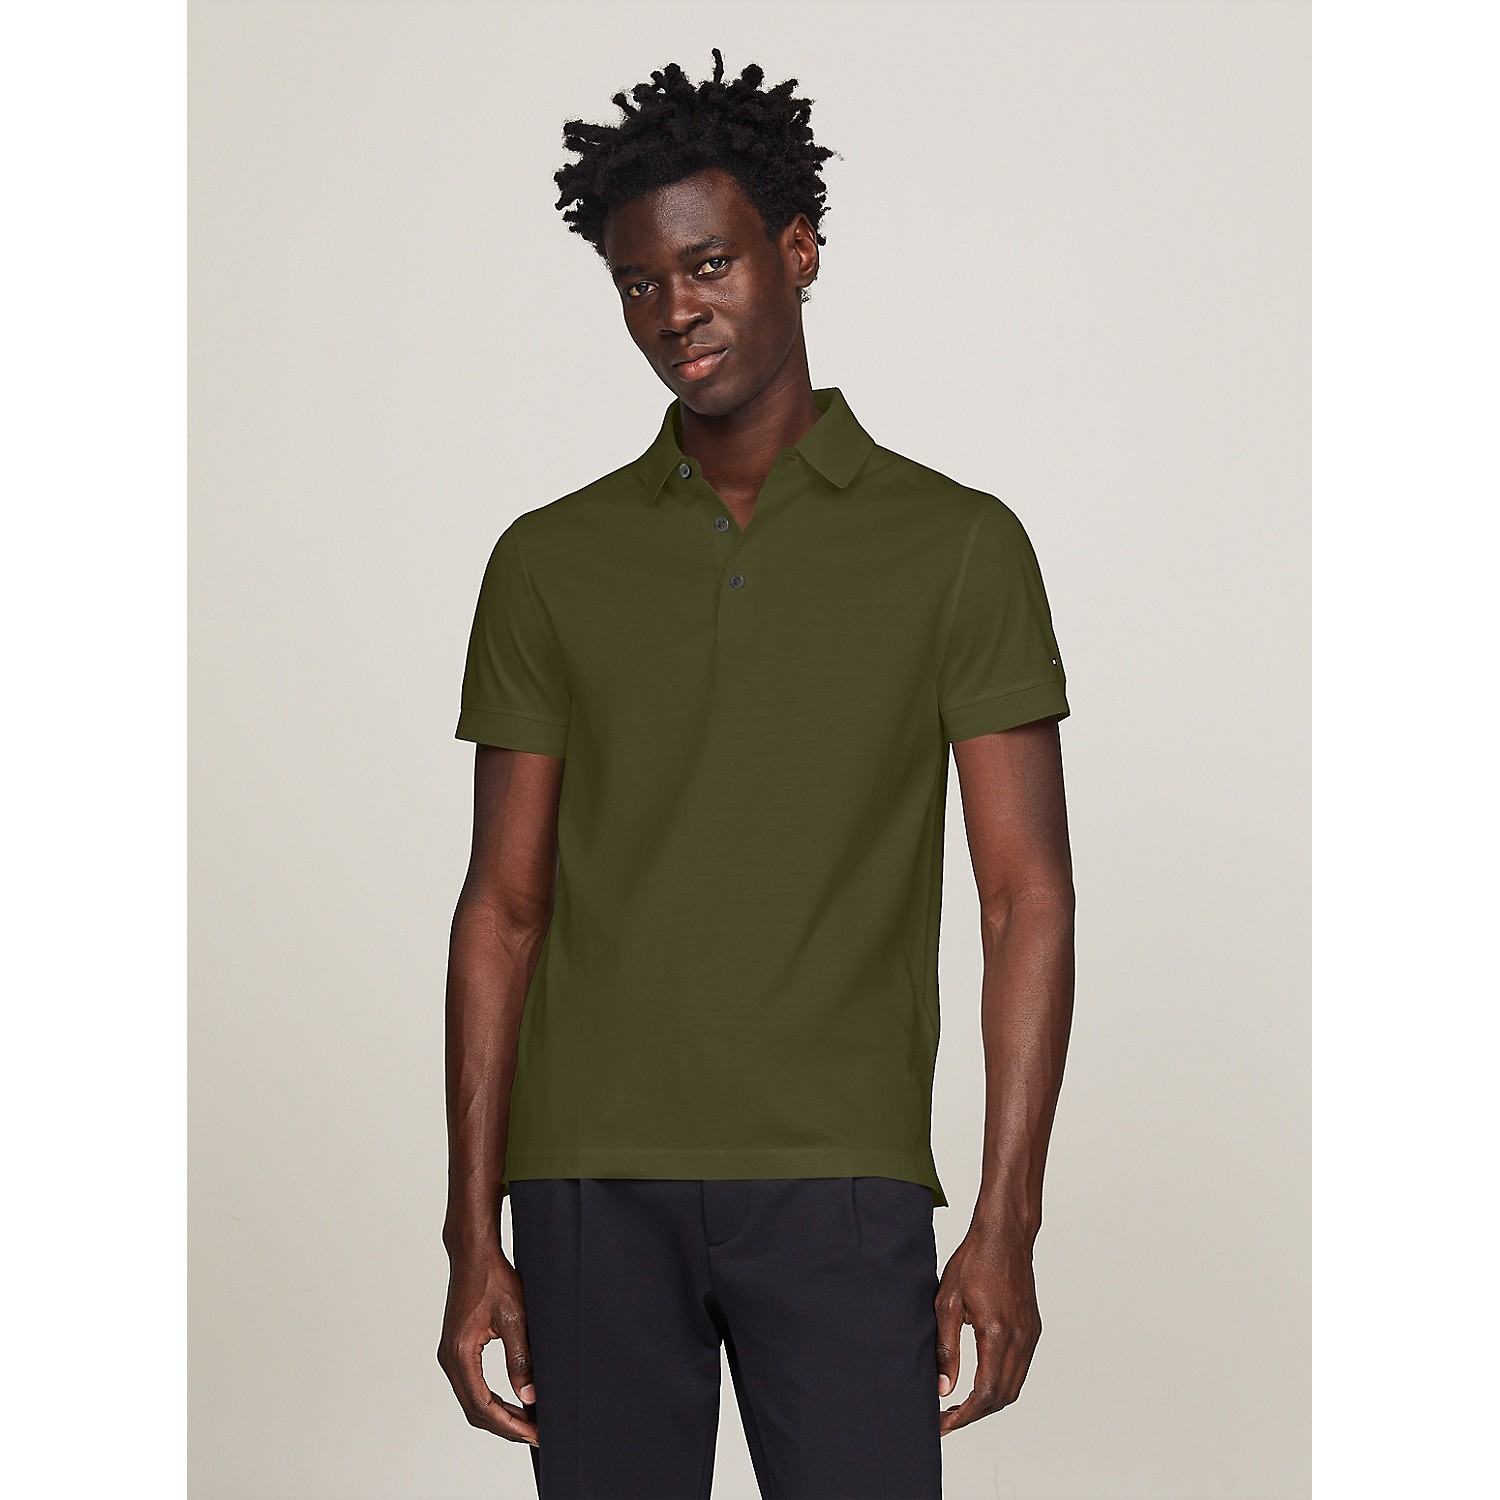 TOMMY HILFIGER Slim Fit Solid Mercerized Polo